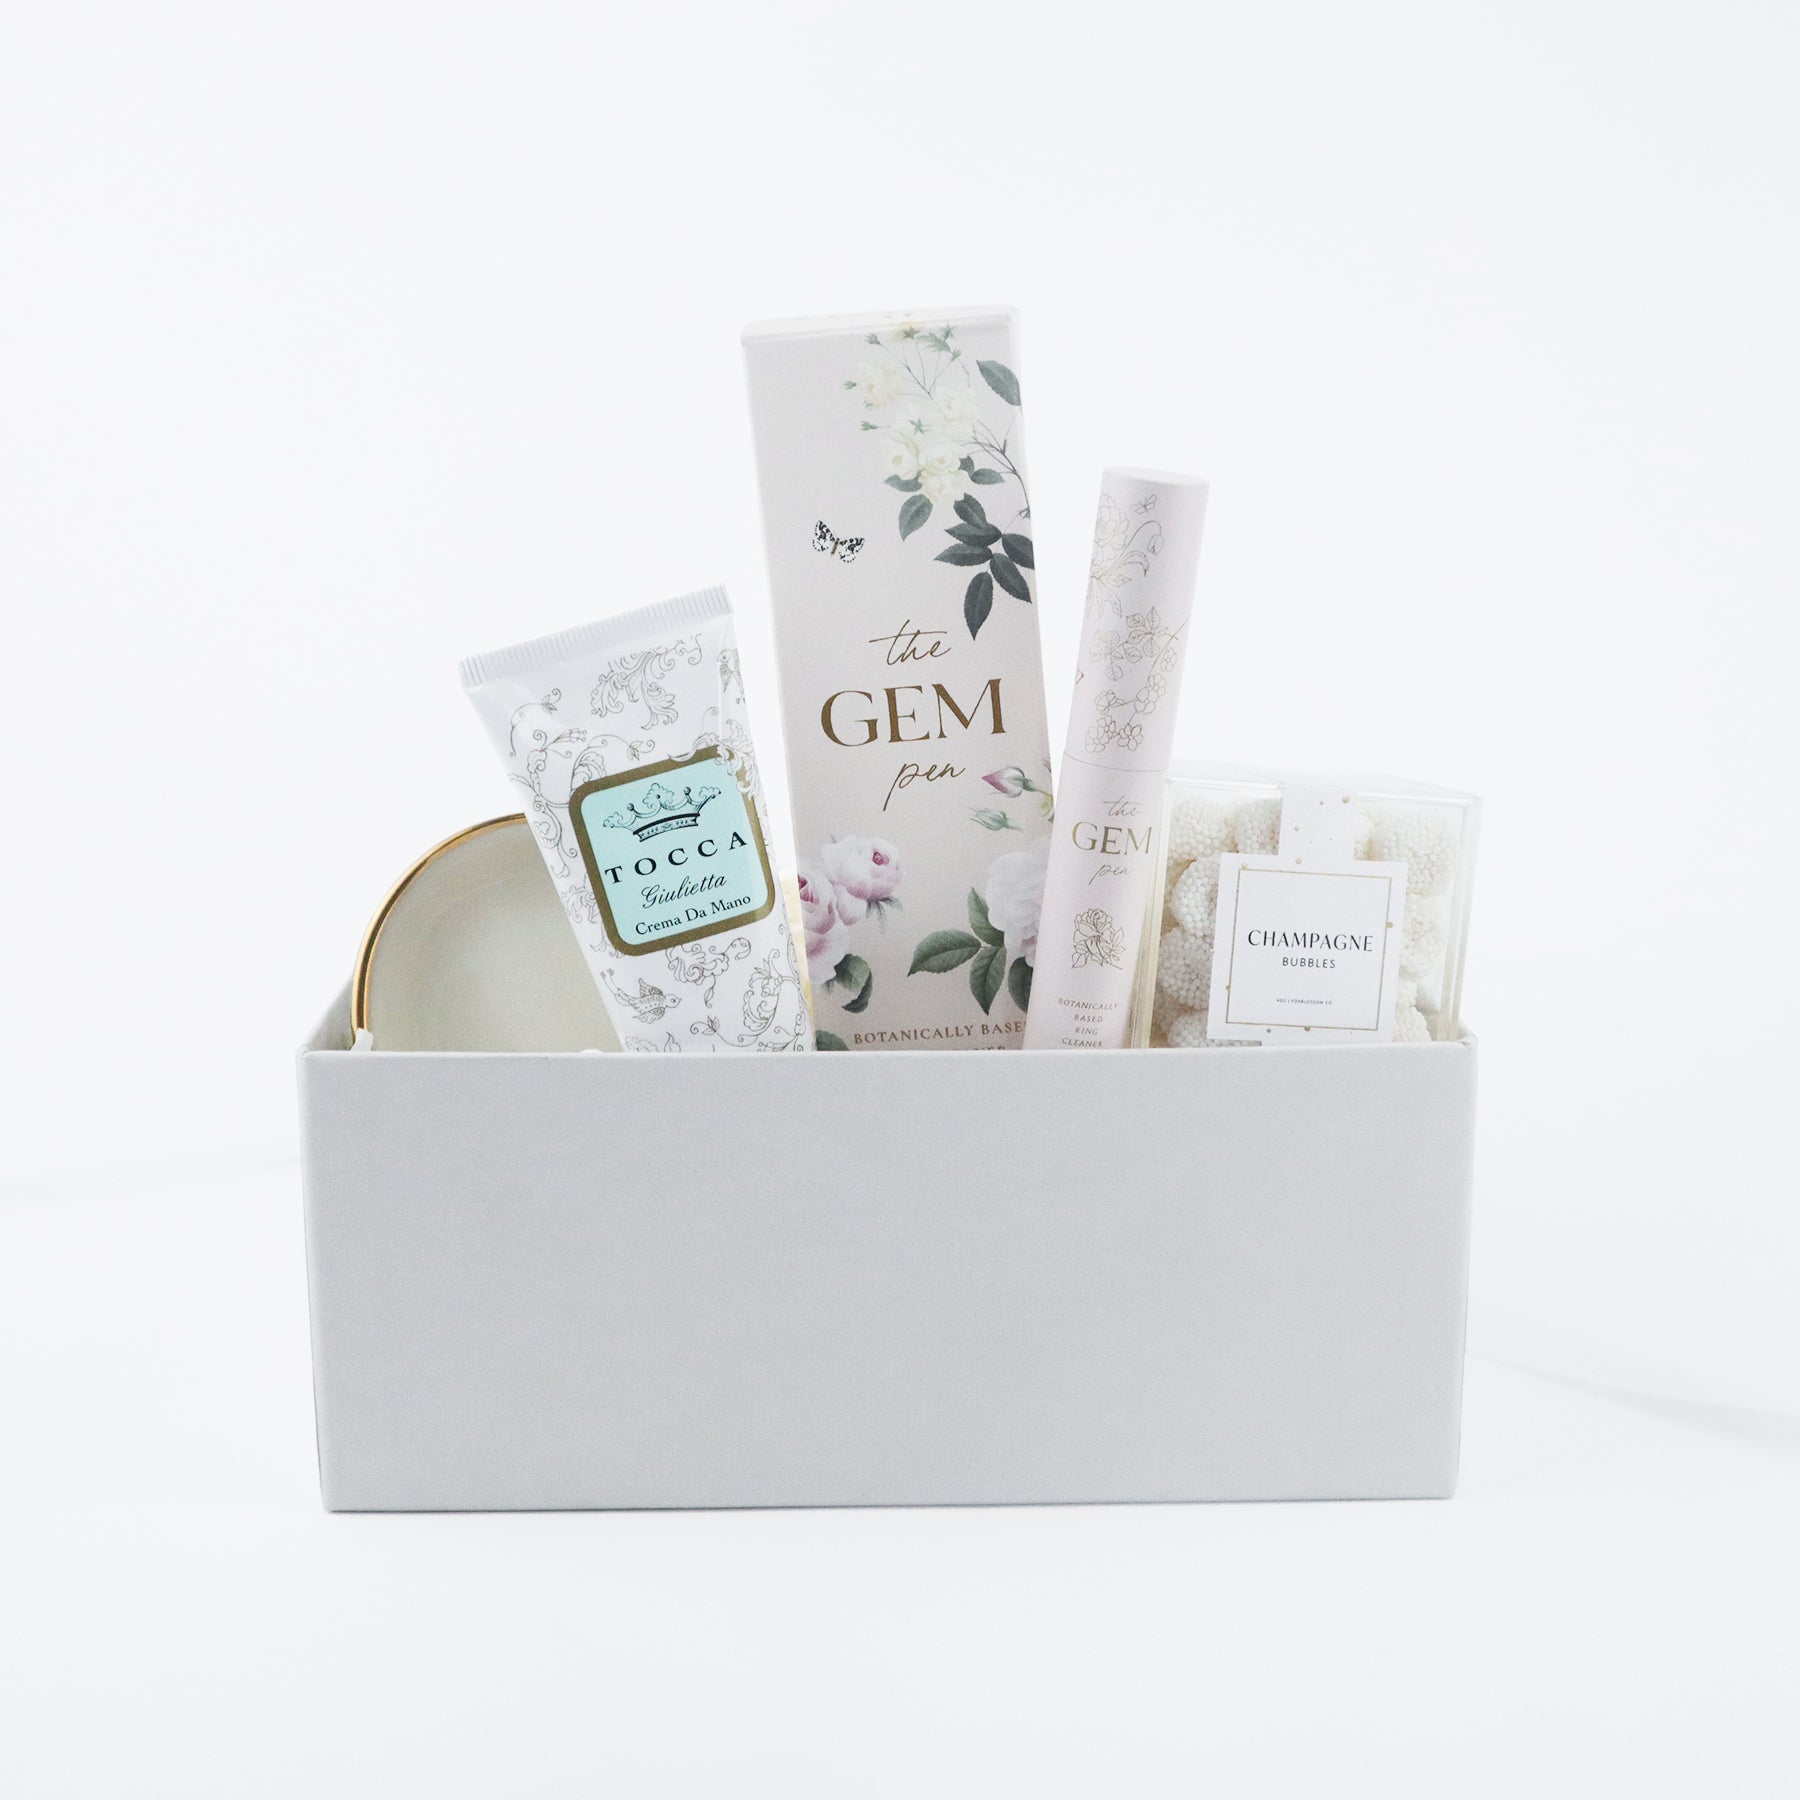 Engagement Gift box, Curated Engagement Gifts, Bride to Be Gift, Best Wedding Gifts, Unique Bridal Engagement Gift Ideas